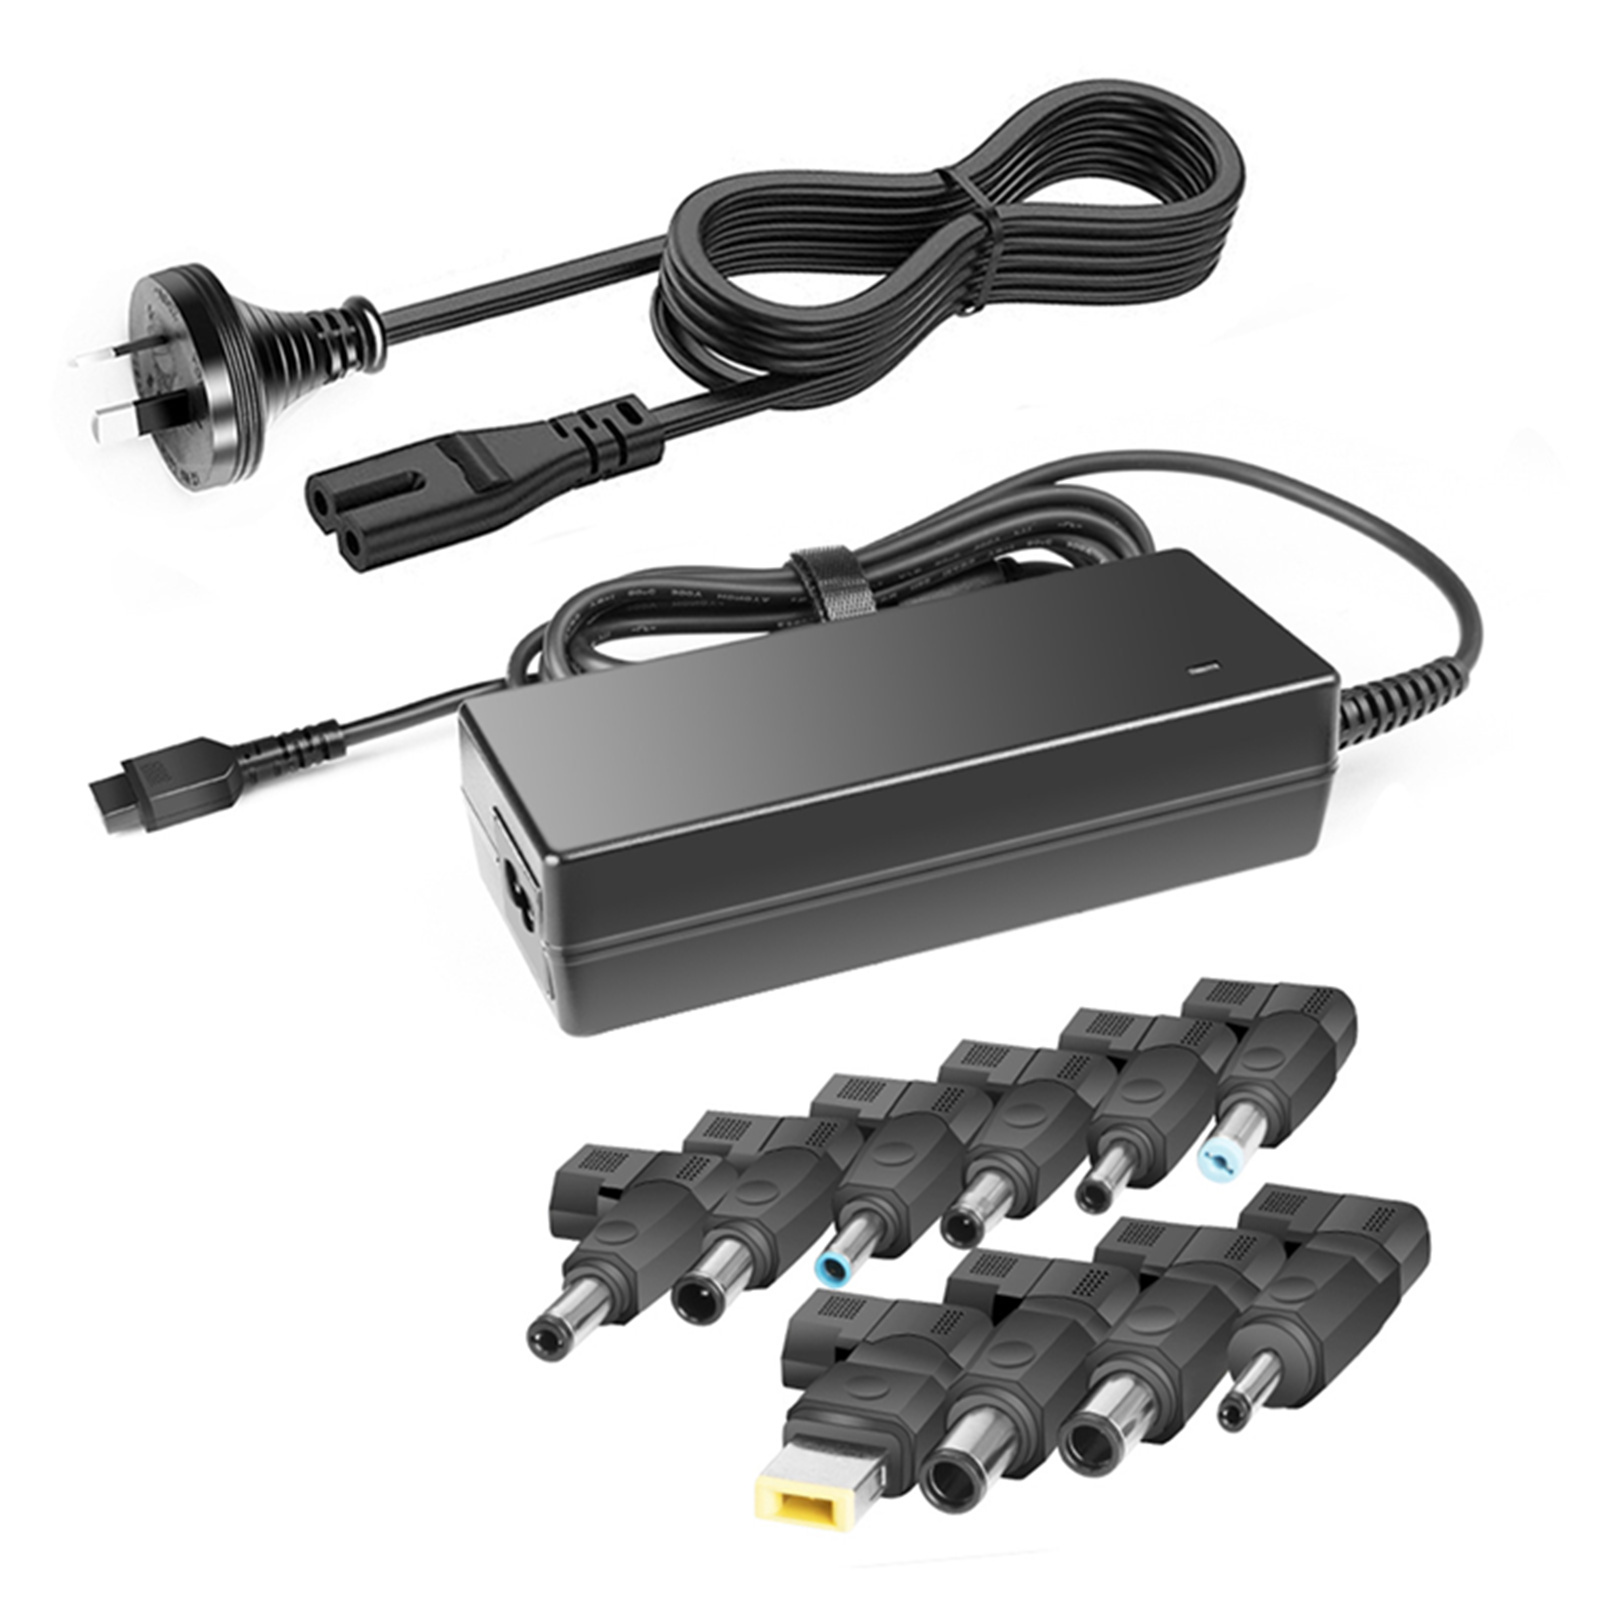 Buy the KFD Universal Laptop Charger 65W with 13 Tips Compatible for Lenovo,...  ( A12 ) online 